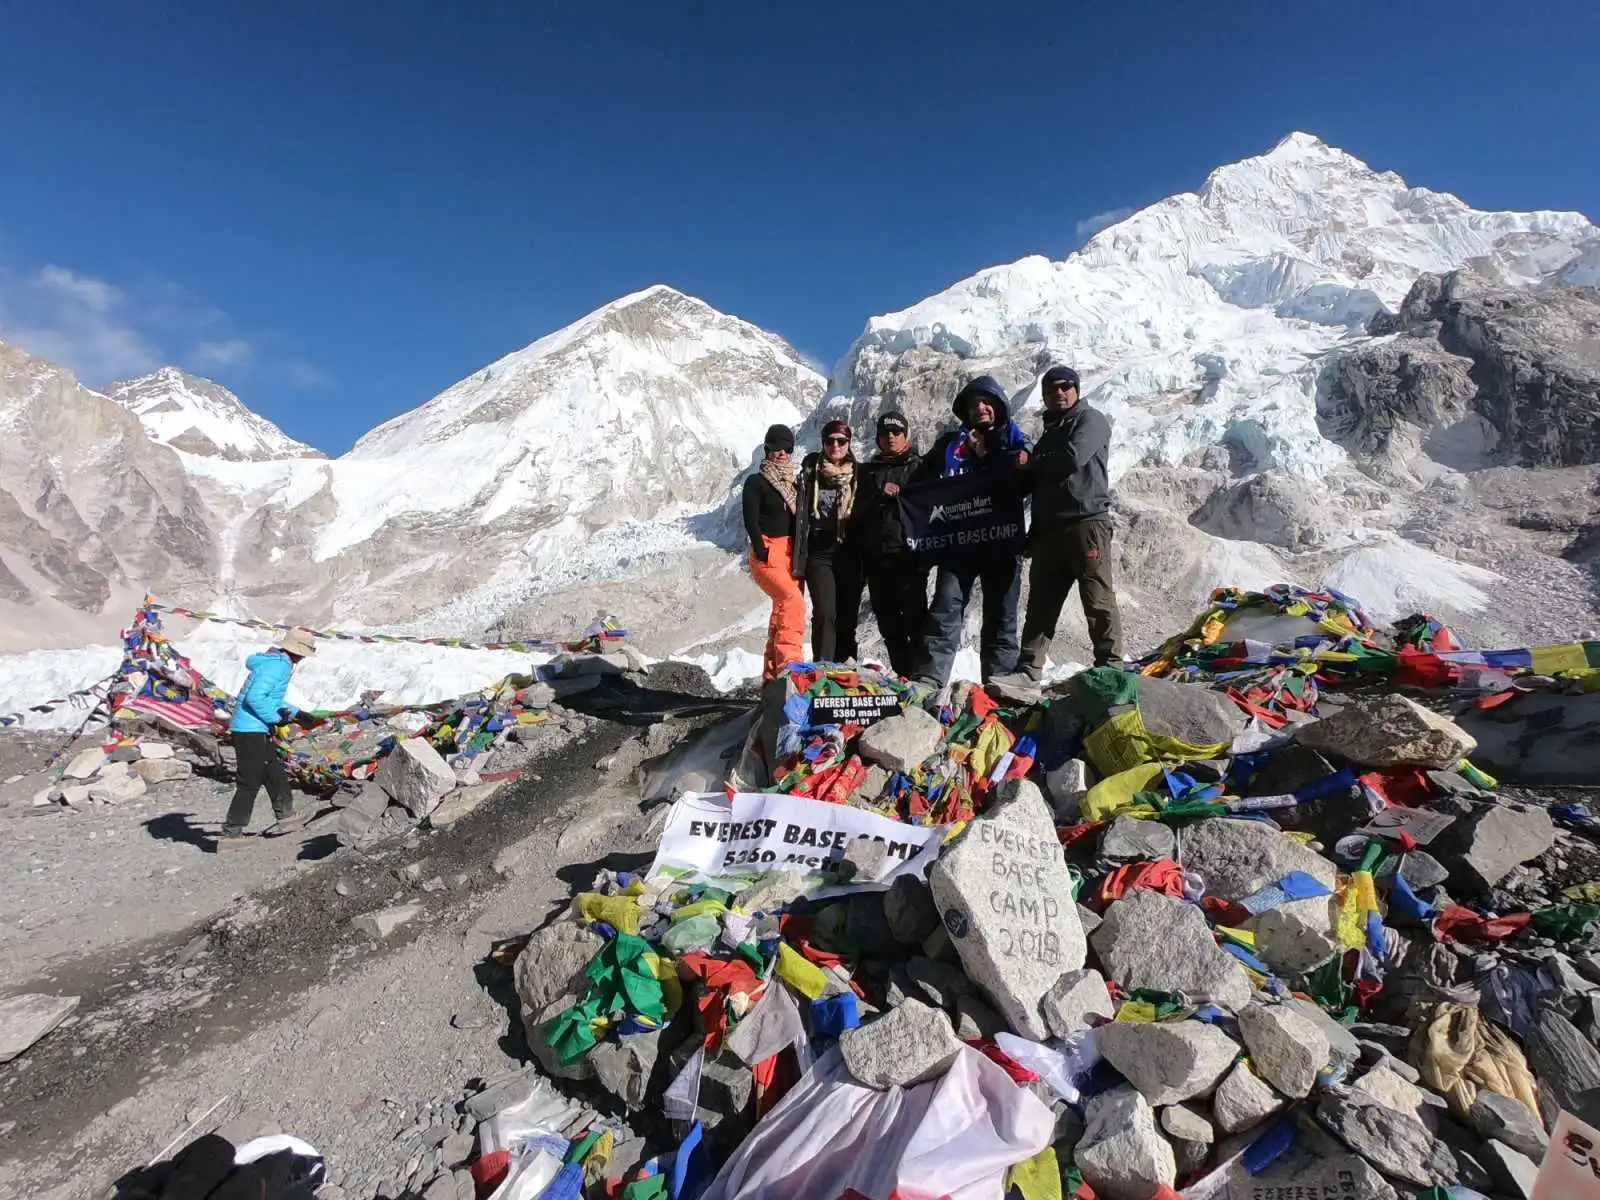 Everest base camp Trek in June - Highlights | Events | How Cold | Difficulty and More